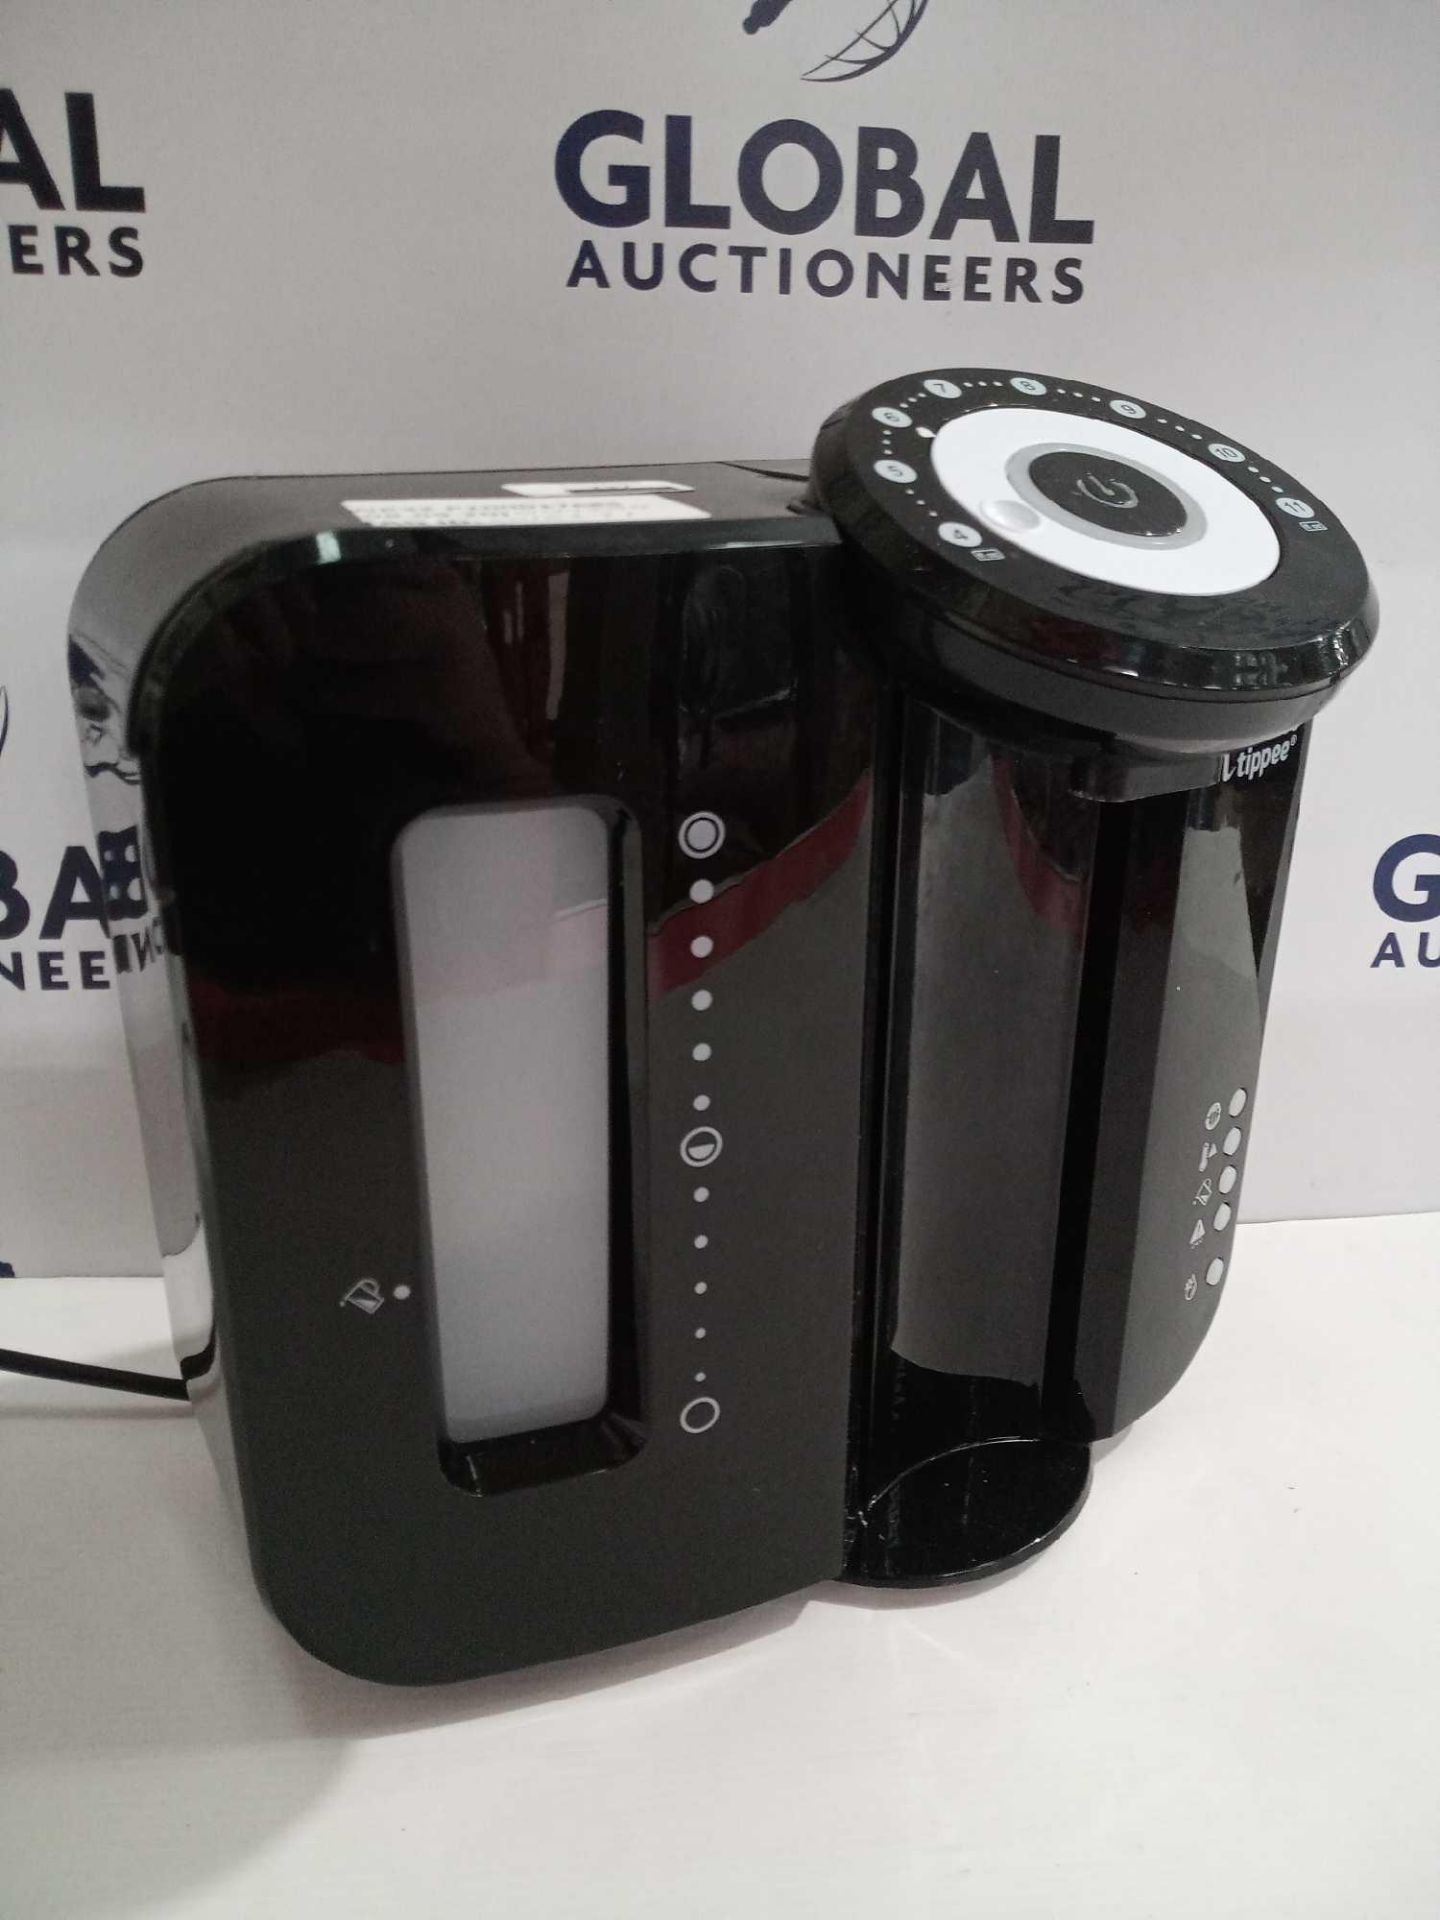 Rrp £75 Each Tommee Tippee Perfect Preparation Machines In Black - Image 4 of 4